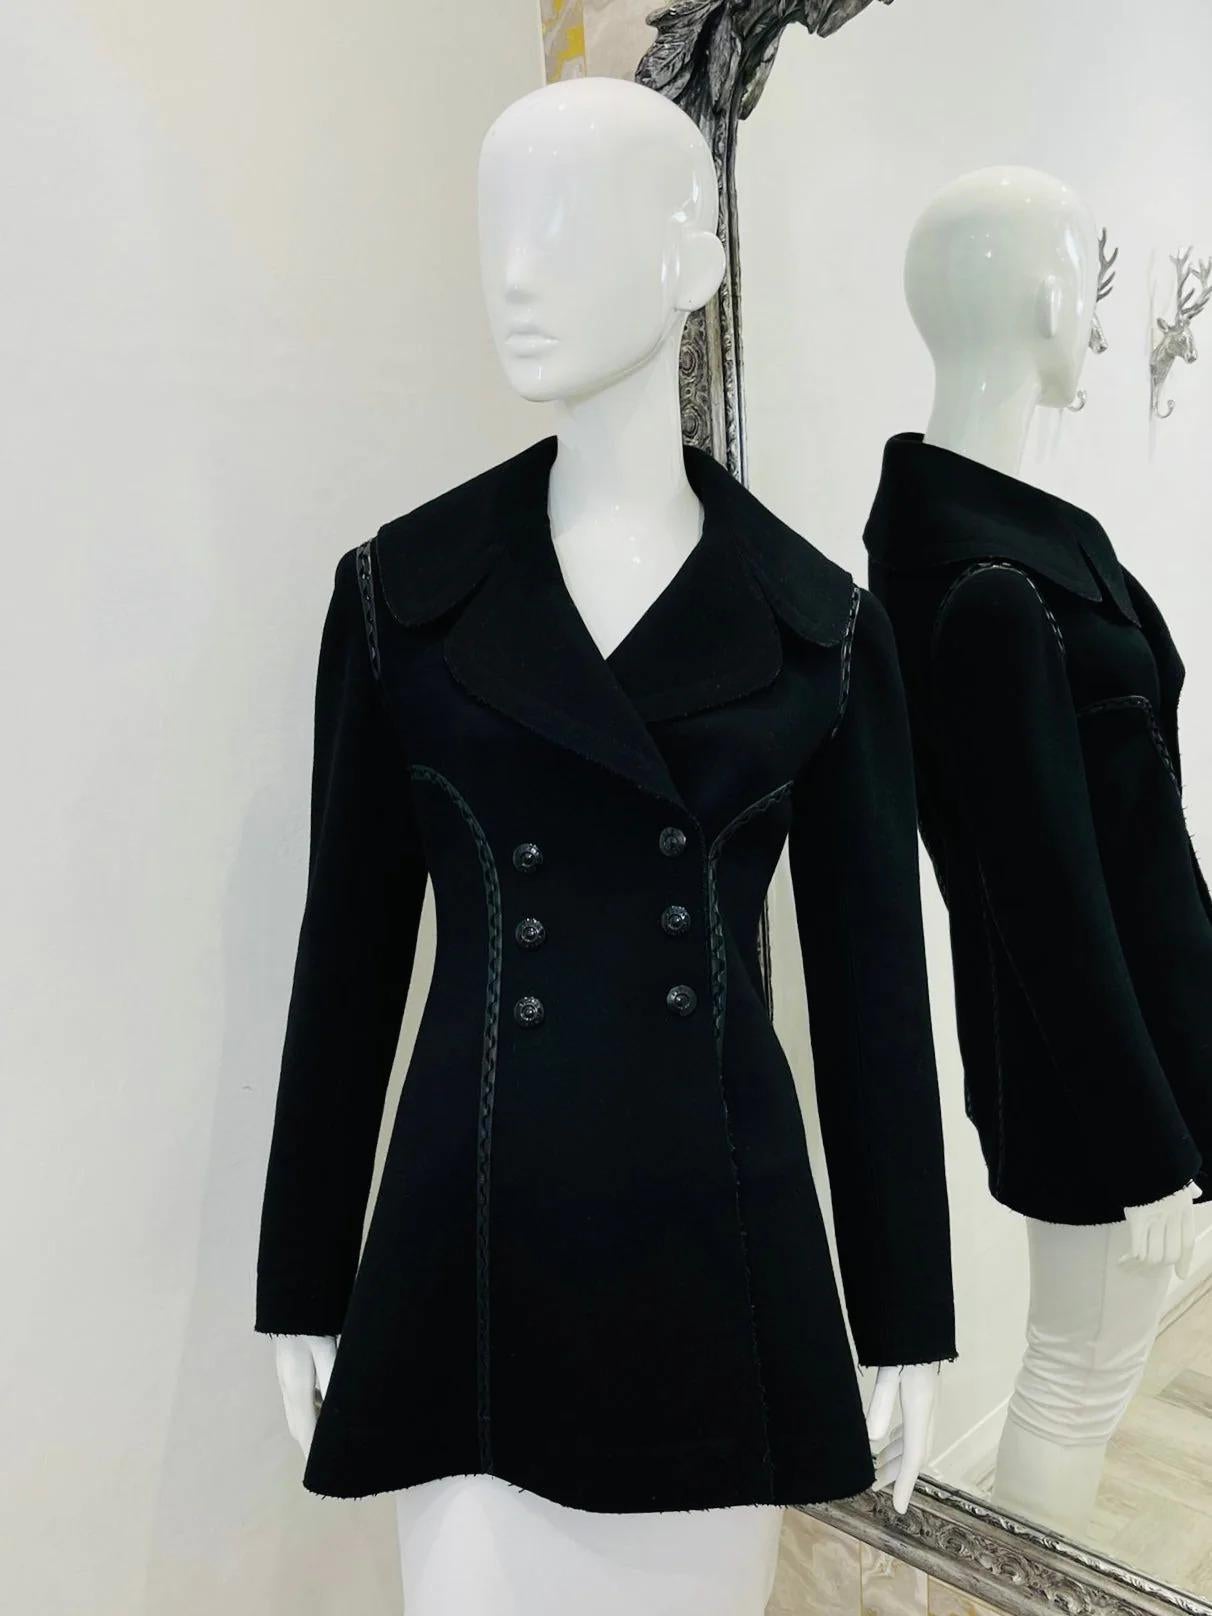 Alaia Wool Coat With Leather Trim

Black fit and flare style, double breasted with button closure.

Additional information:
Size – 38FR (Fits Smaller)
Composition – Wool, Leather
Condition – Very Good (Light signs of wear)